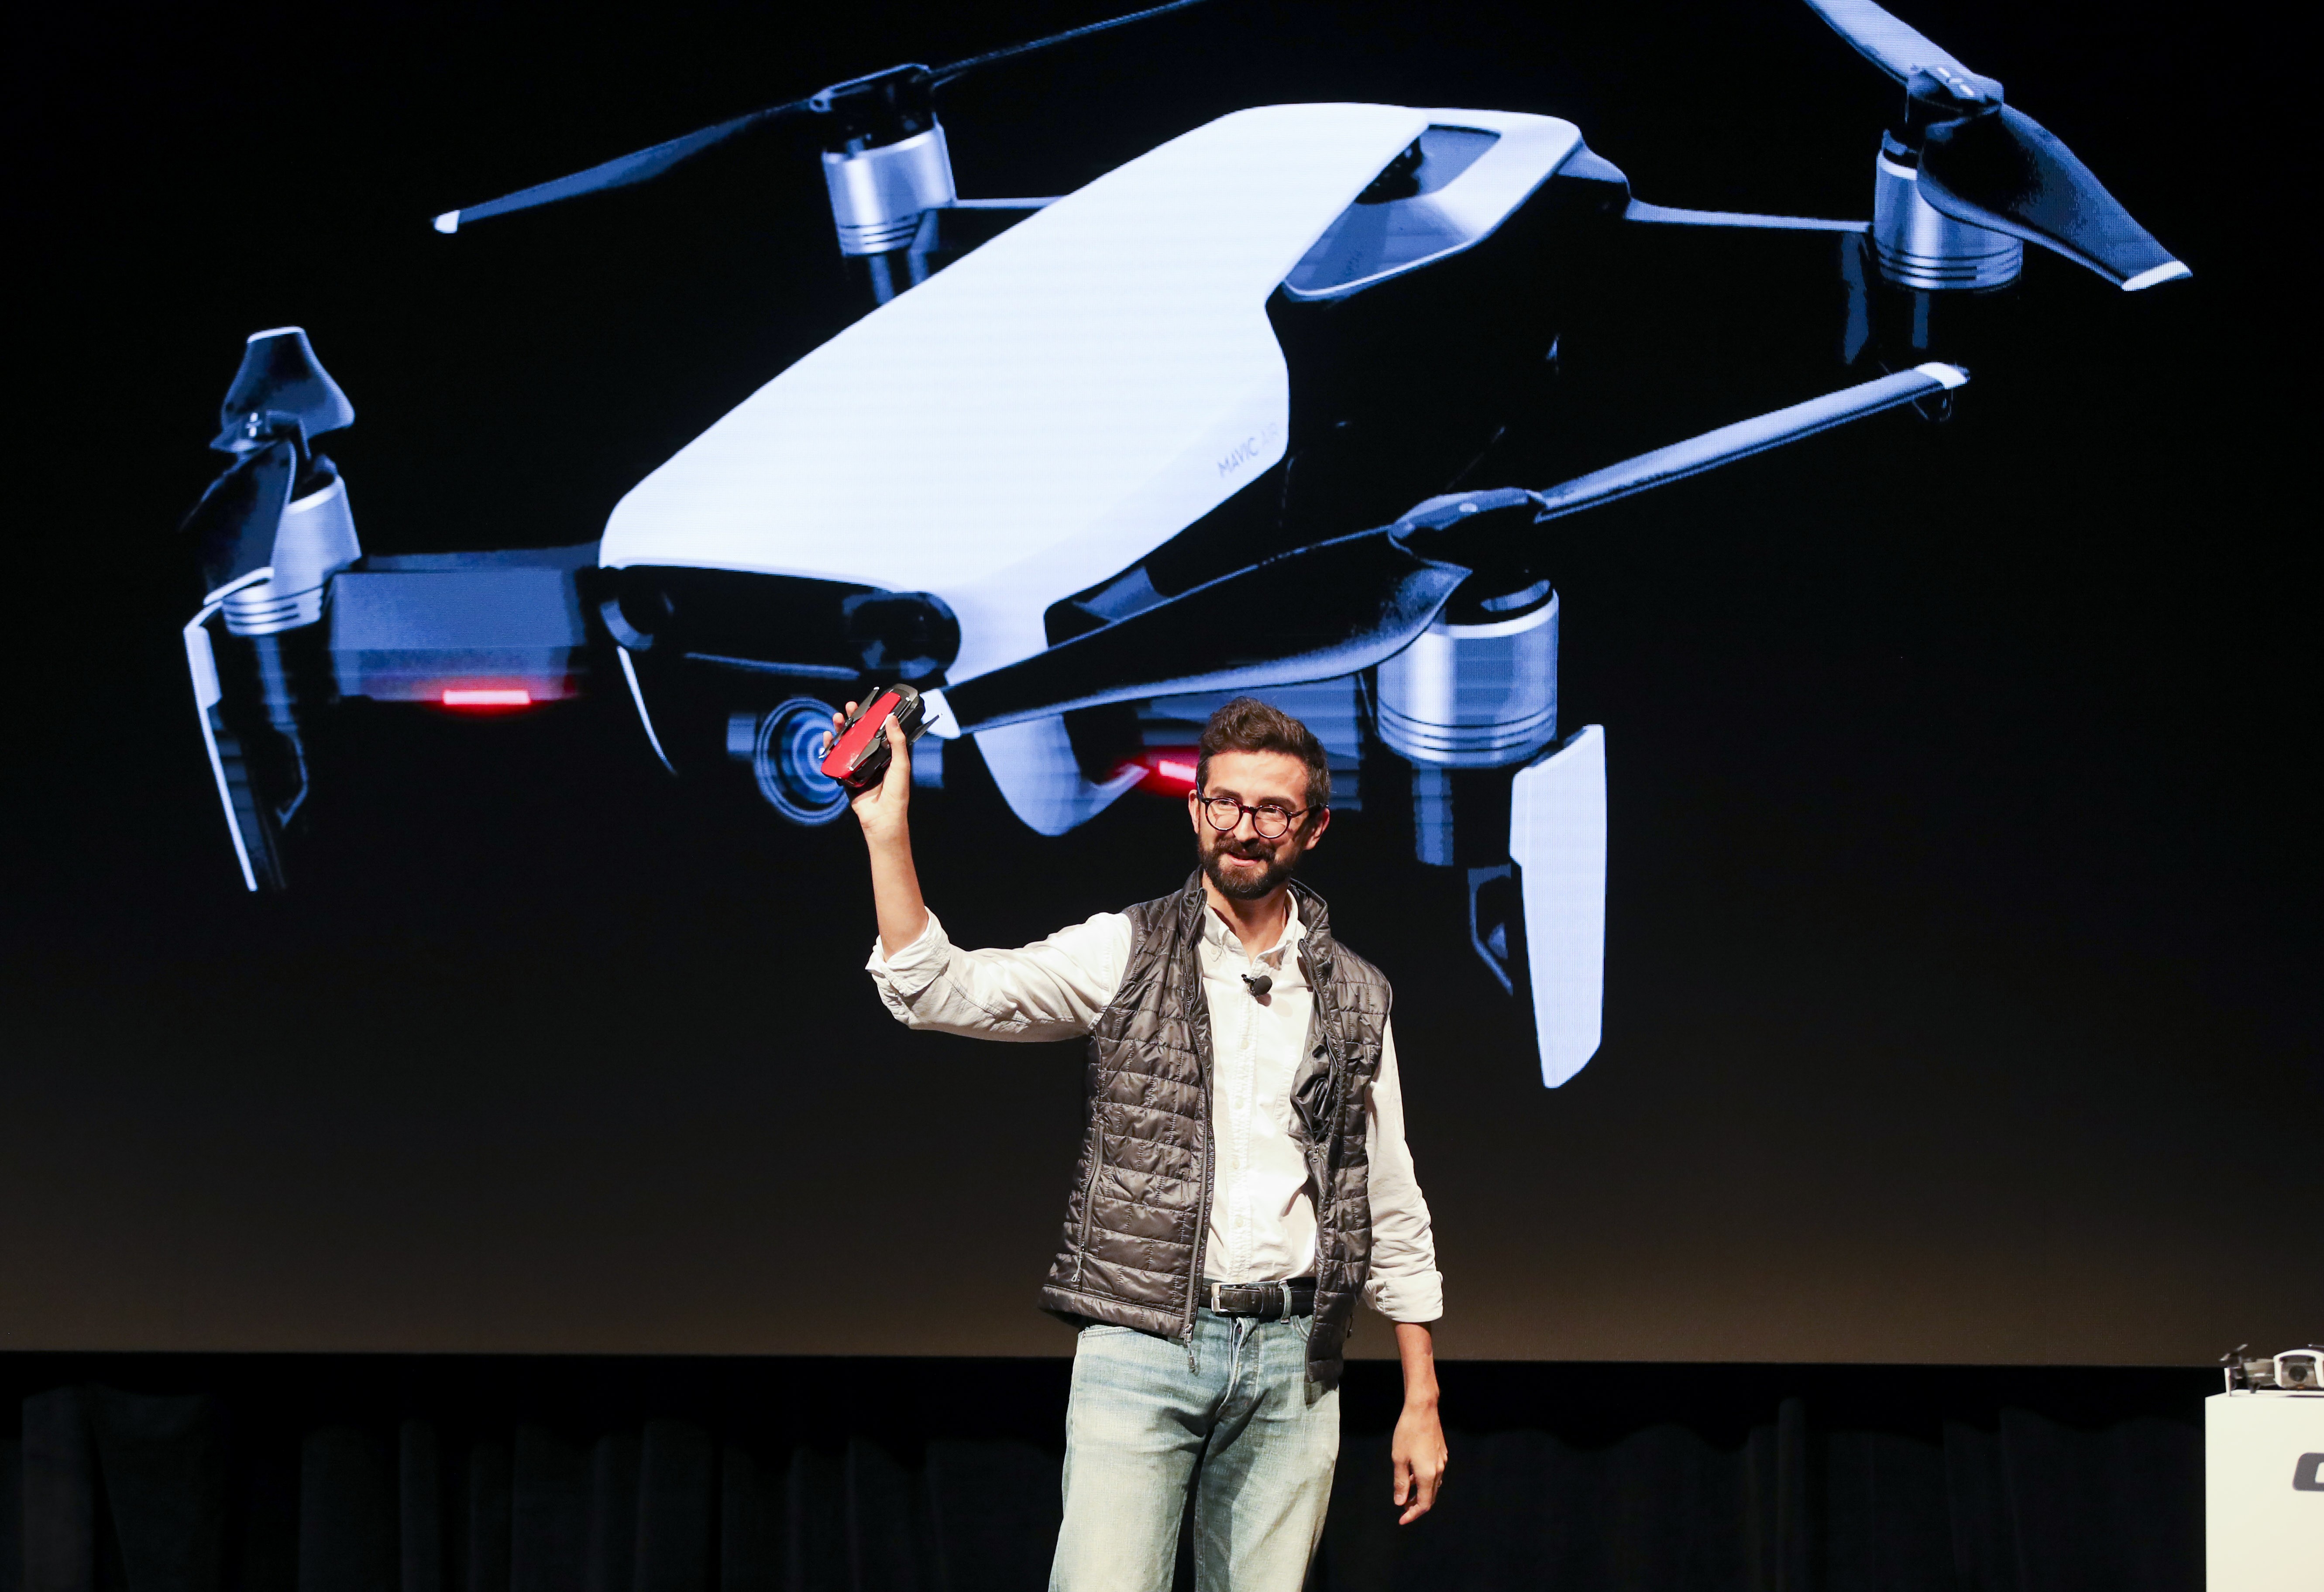 The Mavic Air, the size of an iPhone, is on sale now, ready for shipping to Hong Kong next week